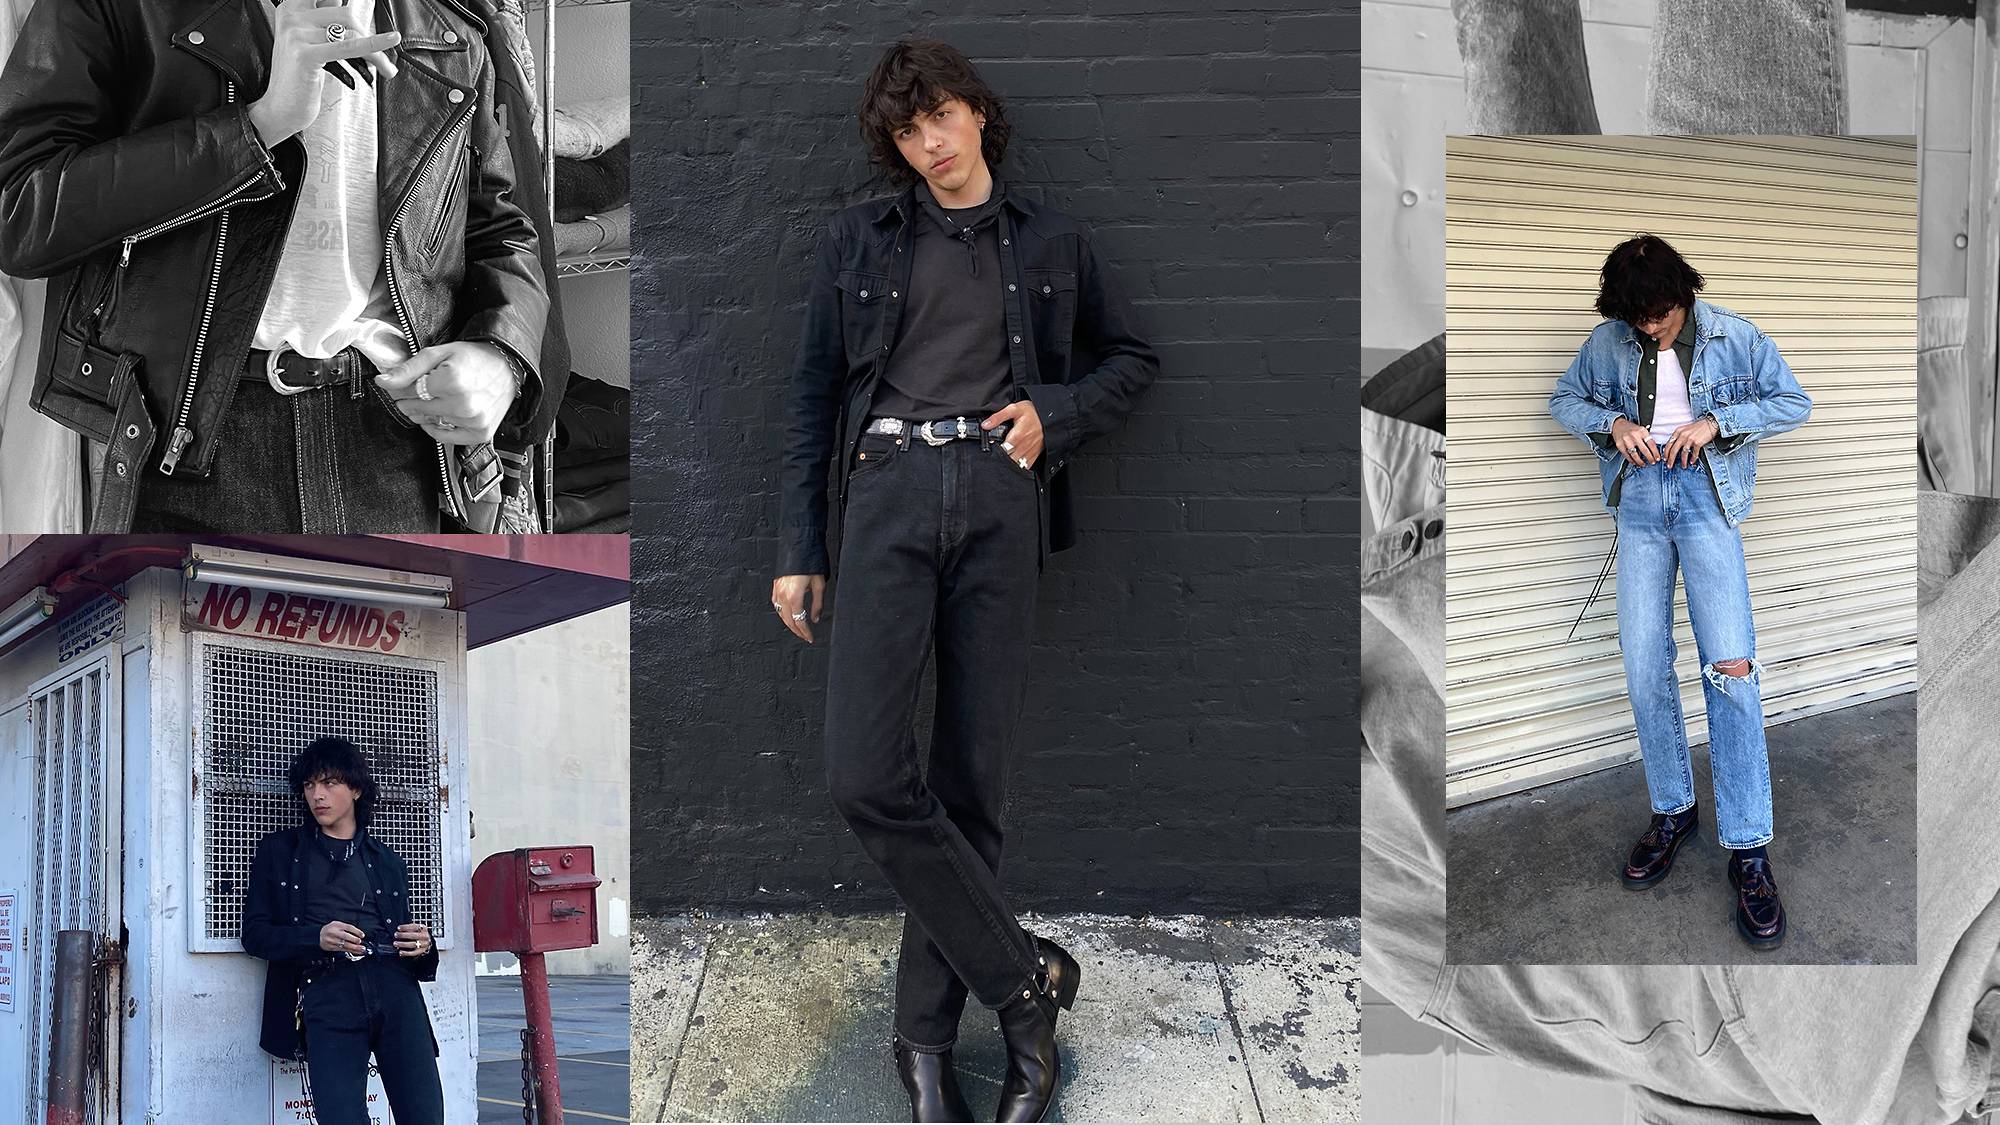 A couple different photos, a man standing against a wall wearing all black, a man standing wearing all denim, a black and white close up shot of a shirt and jacket, and a photo of a man of a man leaning against a building wearing all black